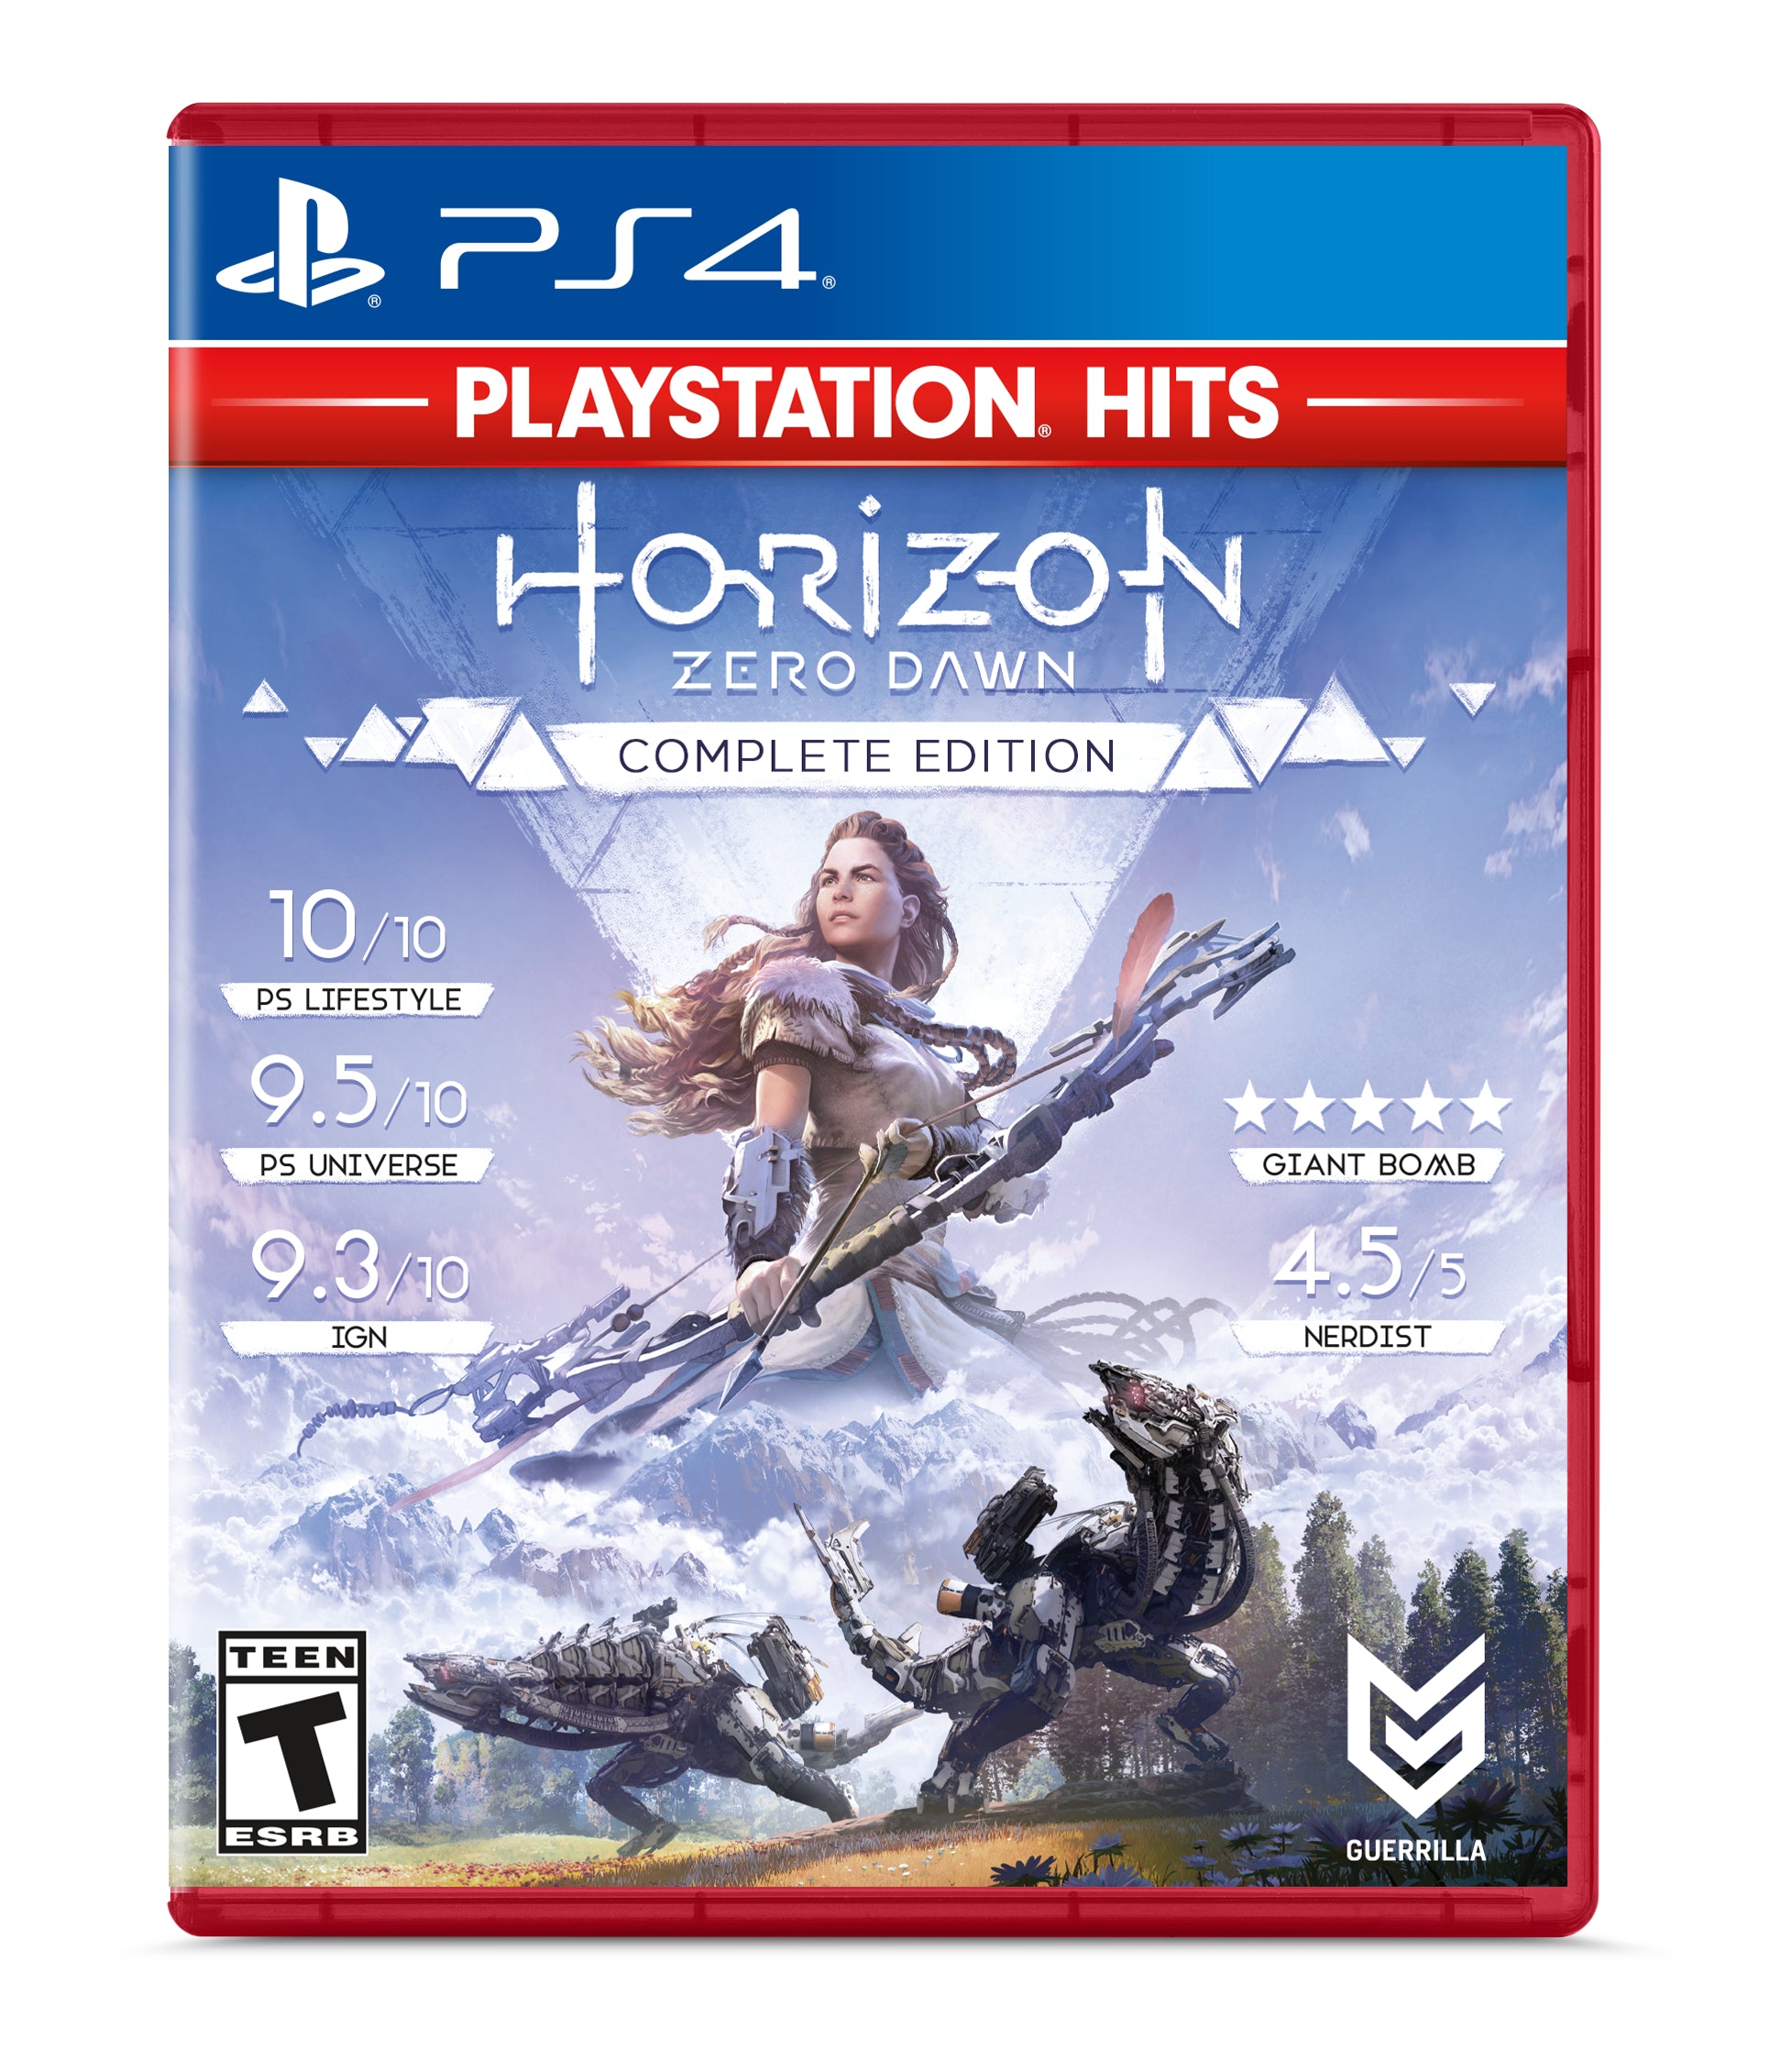 Sony PlayStation 4 Slim Horizon Zero Dawn Bundle Upgrade 2TB SSD PS4 Gaming Console, Jet Black, with Mytrix High Speed HDMI - 2TB Internal Fast Solid State Drive Enhanced PS4 Console